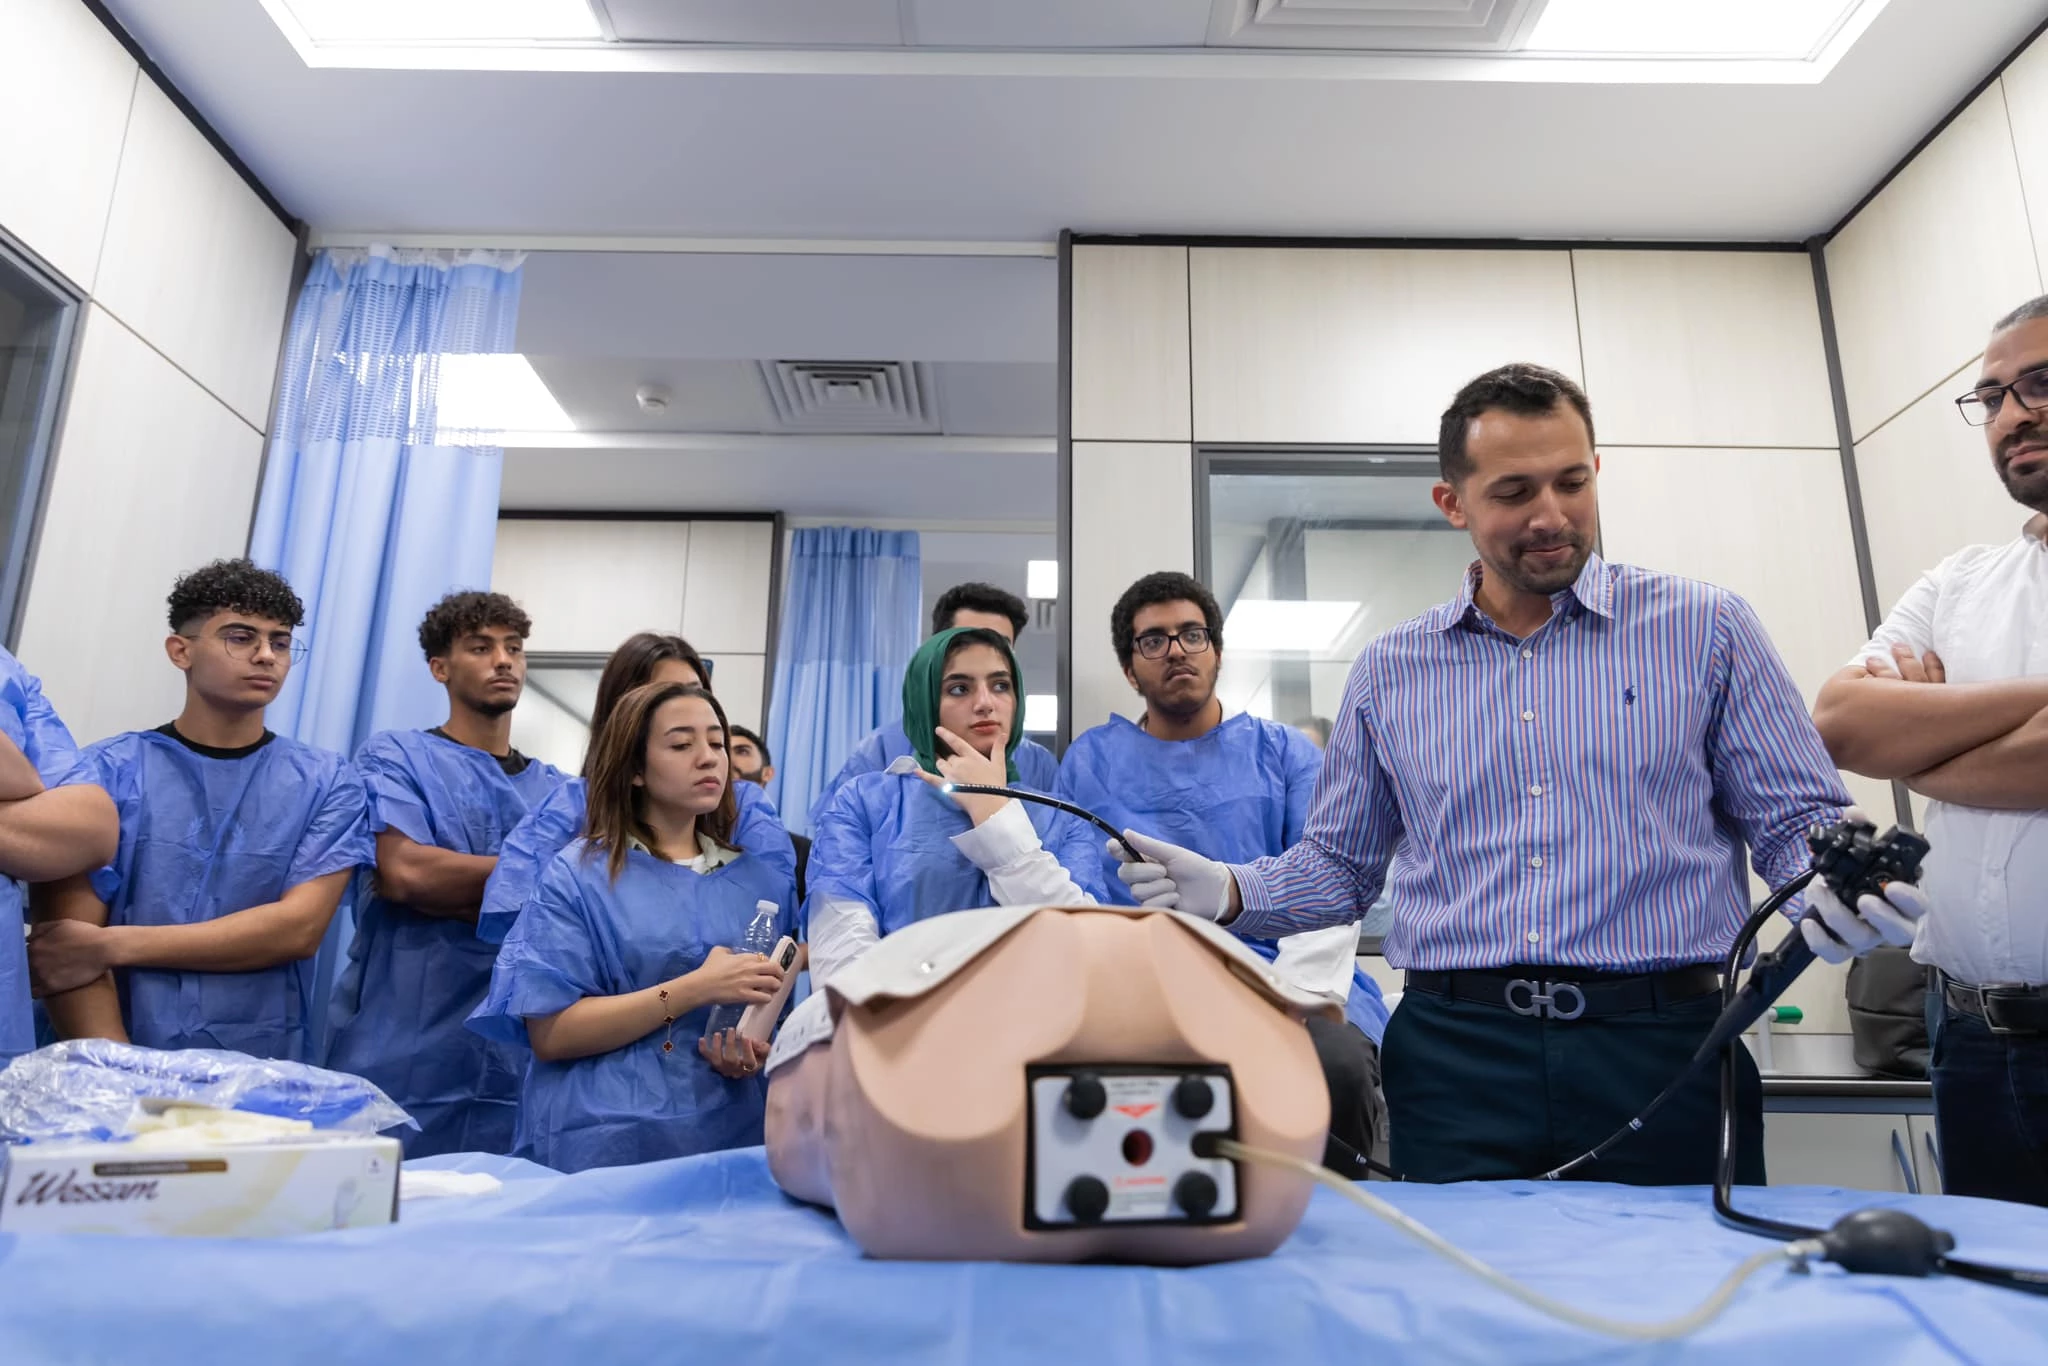 Faculty of Medicine at the Arab Academy Hosts Successful Workshop on Gastrointestinal Endoscopy at its Simulation Center4